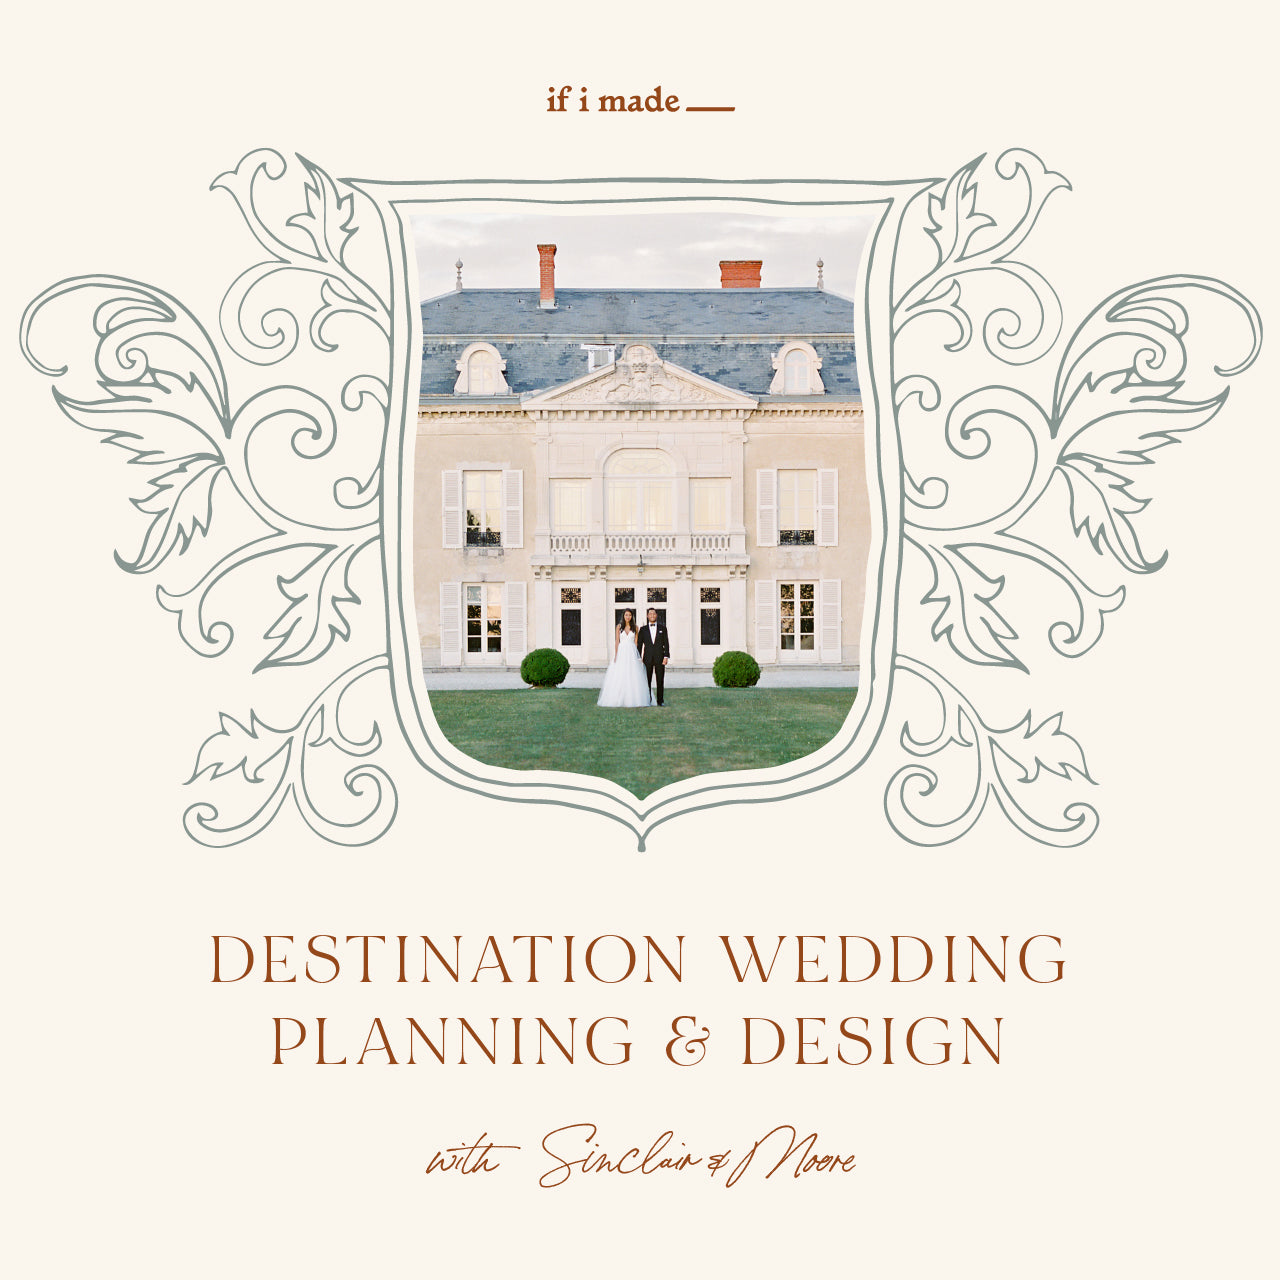 Destination Wedding Planning & Design with Sinclair & Moore (ESPP1021) - 24 payments of $69